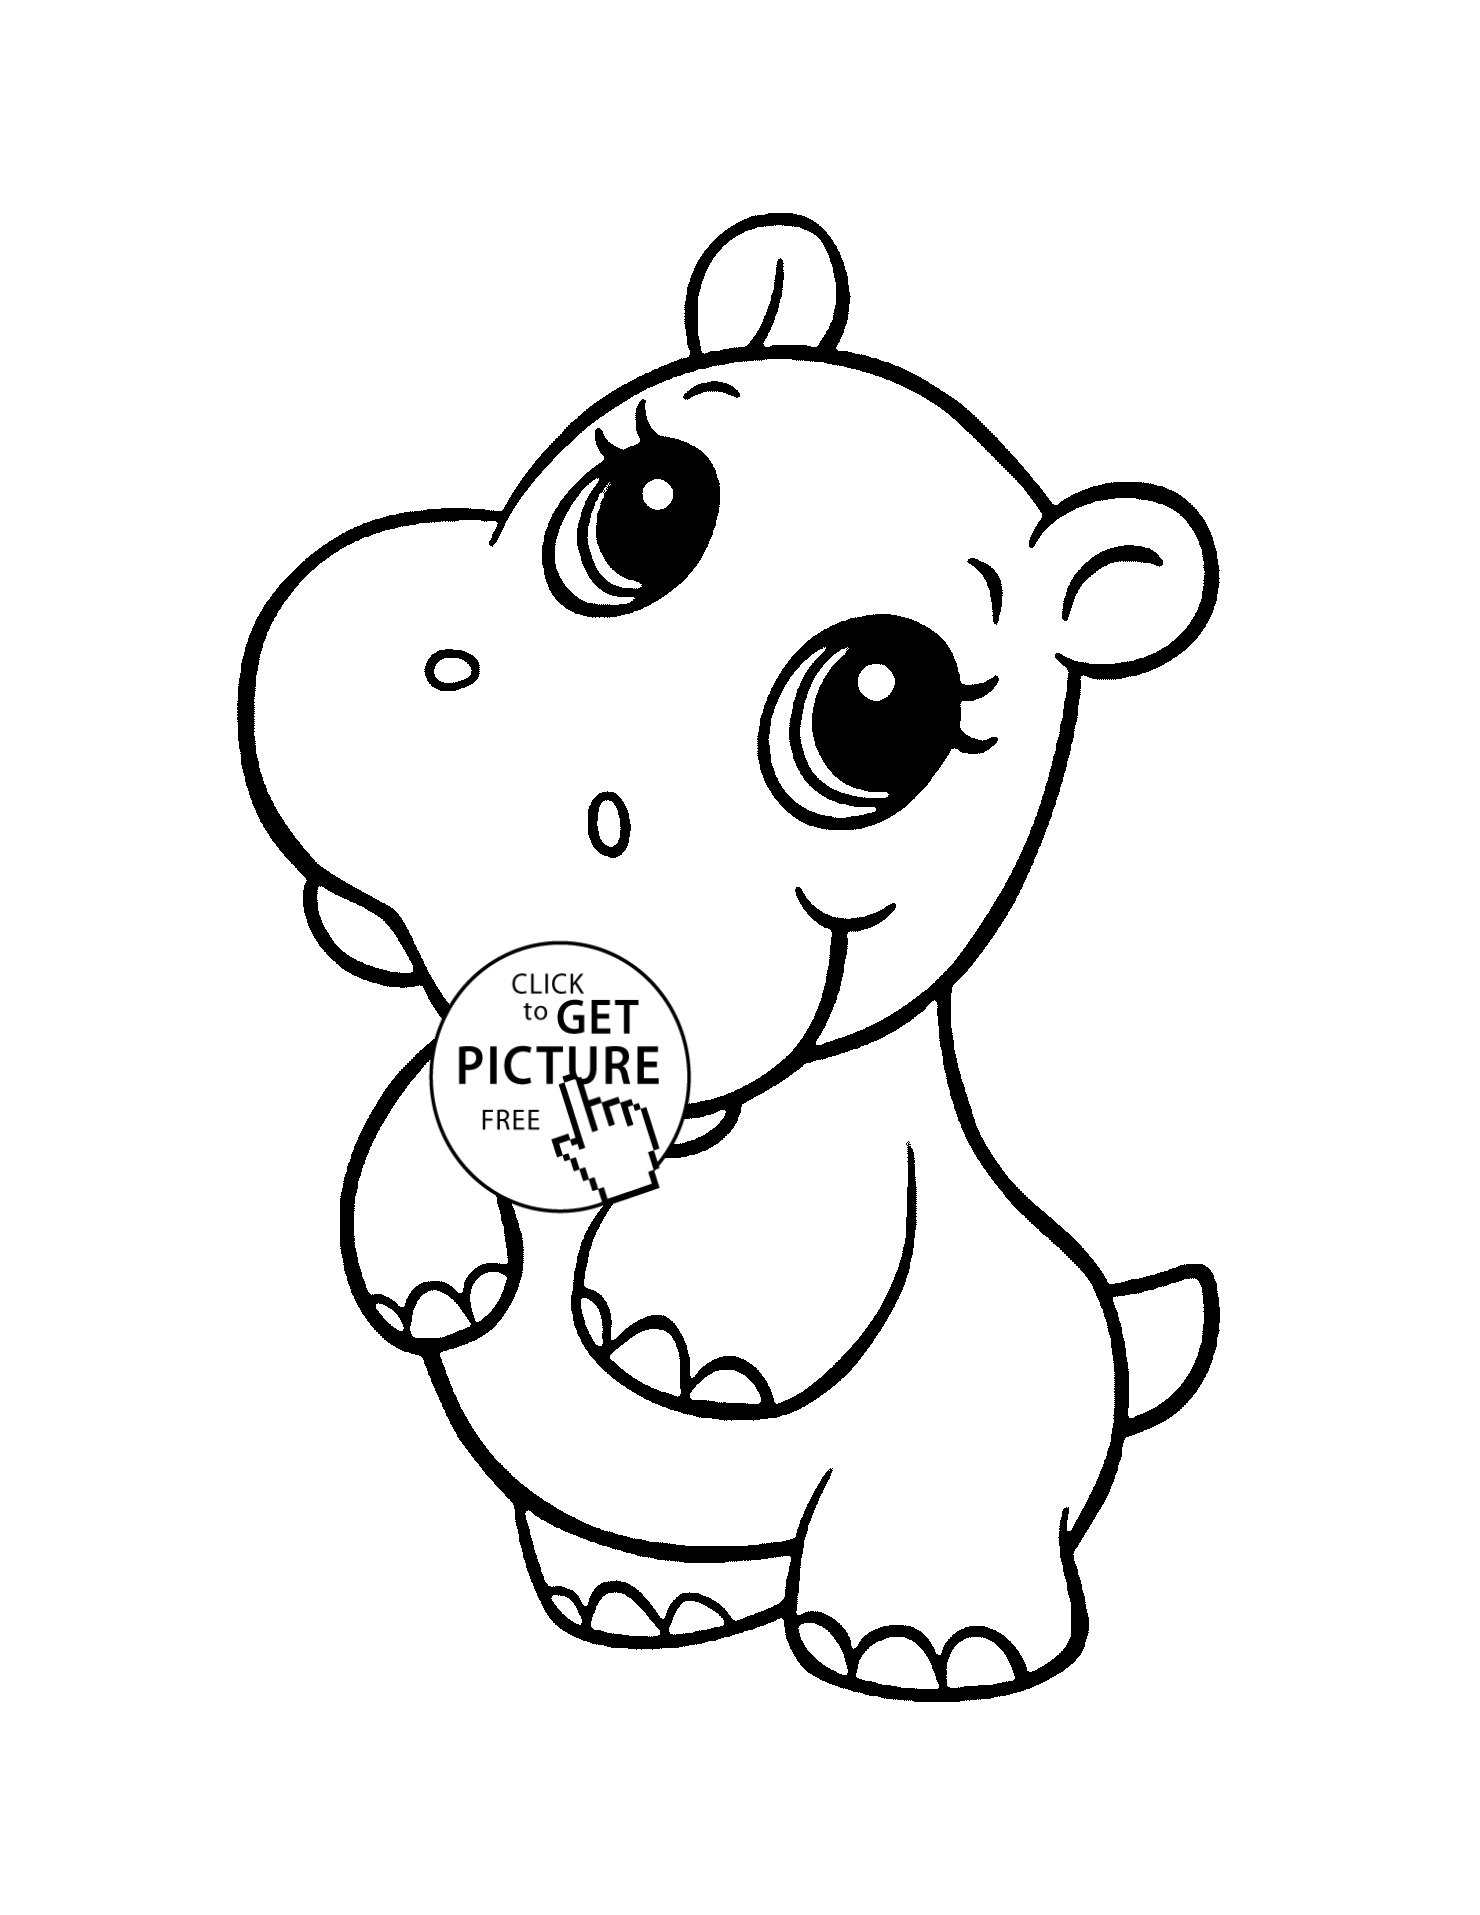 Cute Animal Printable - Coloring Pages for Kids and for Adults